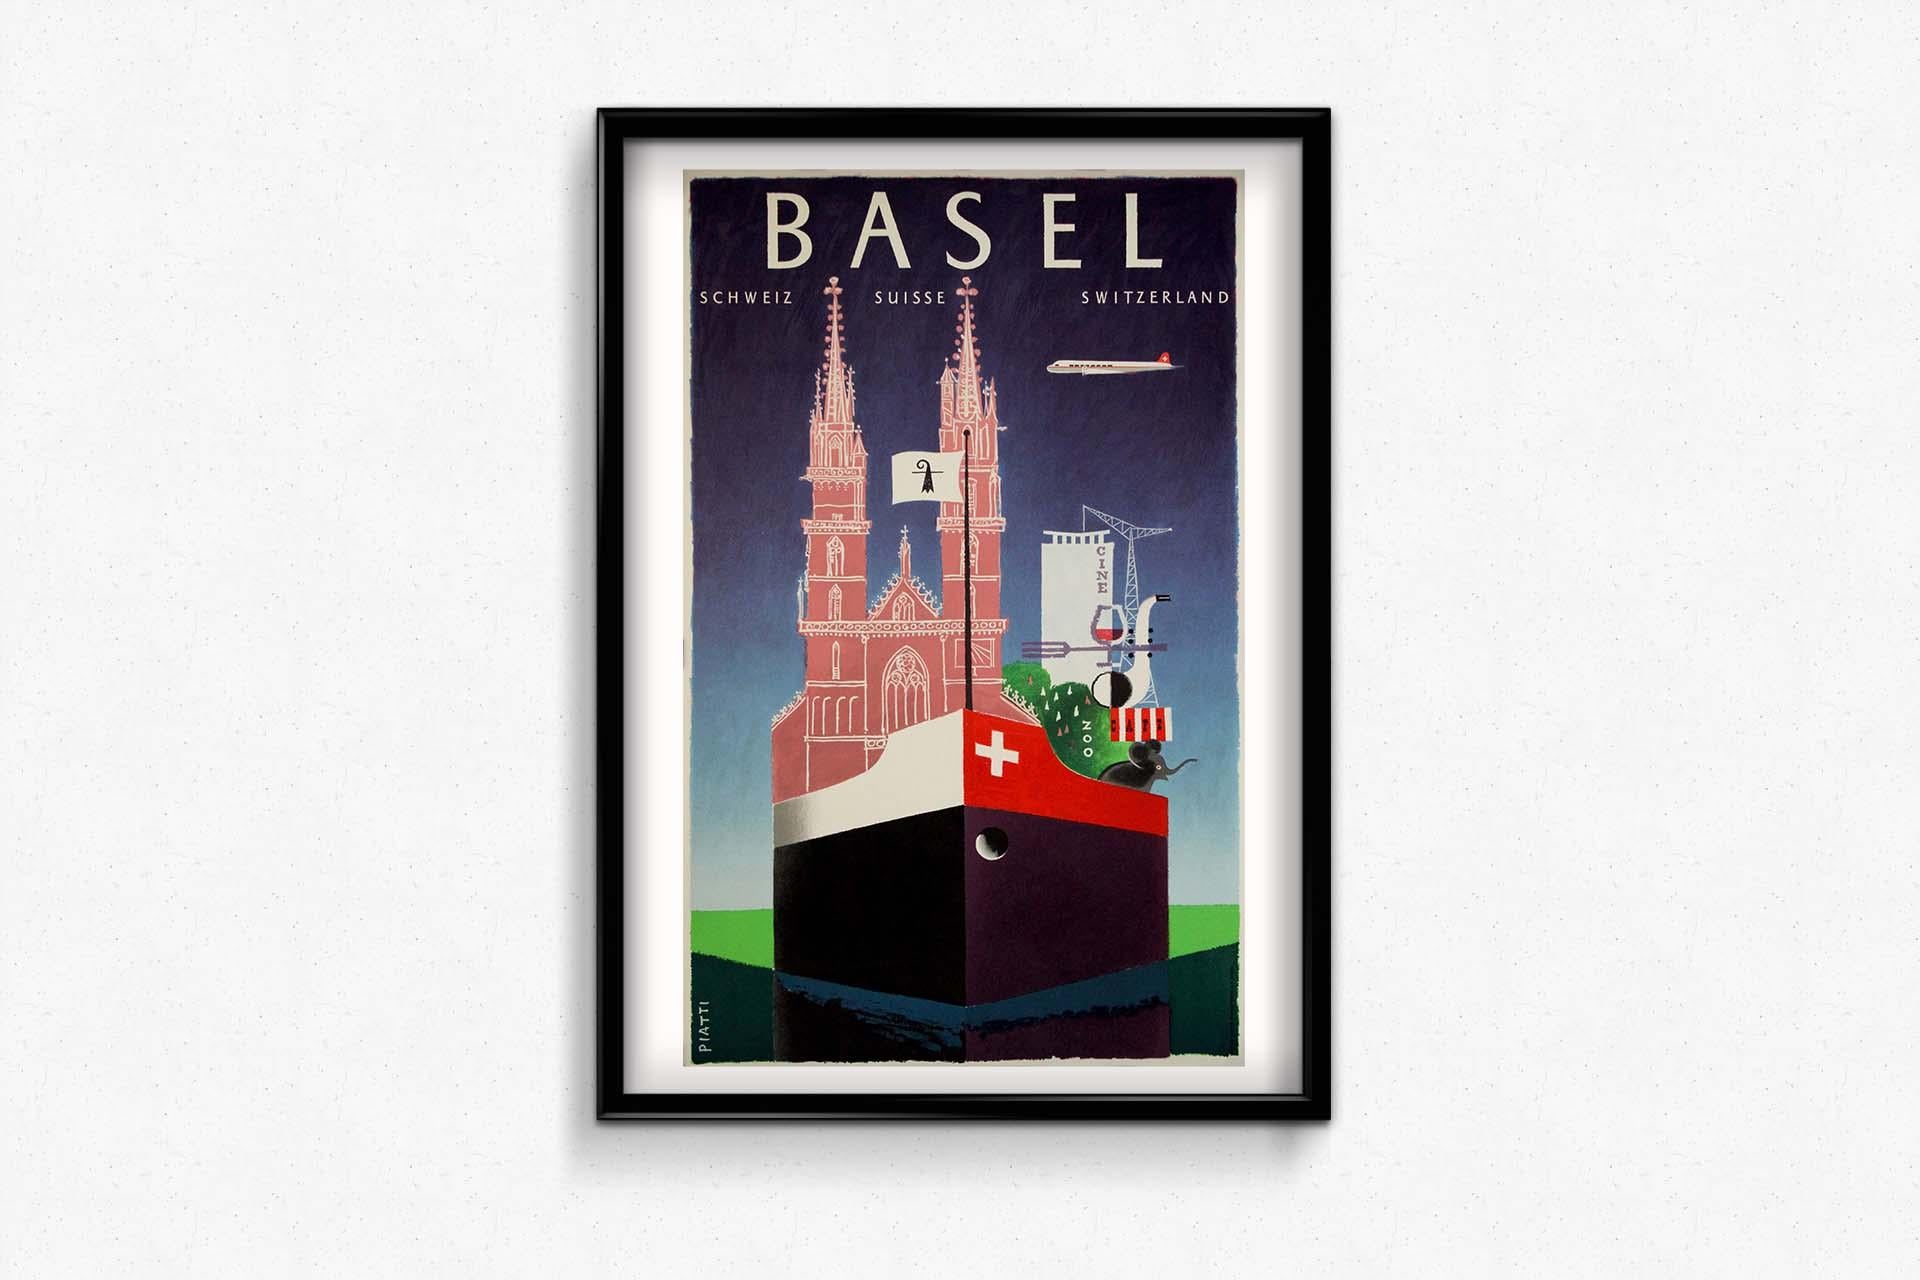 In 1954, Celestino Piatti crafted an original travel poster that captured the essence of Basel, Switzerland. Rather than focusing on specific visuals, Piatti's design aimed to evoke the vibrant spirit of the city through its distinctive style.

With